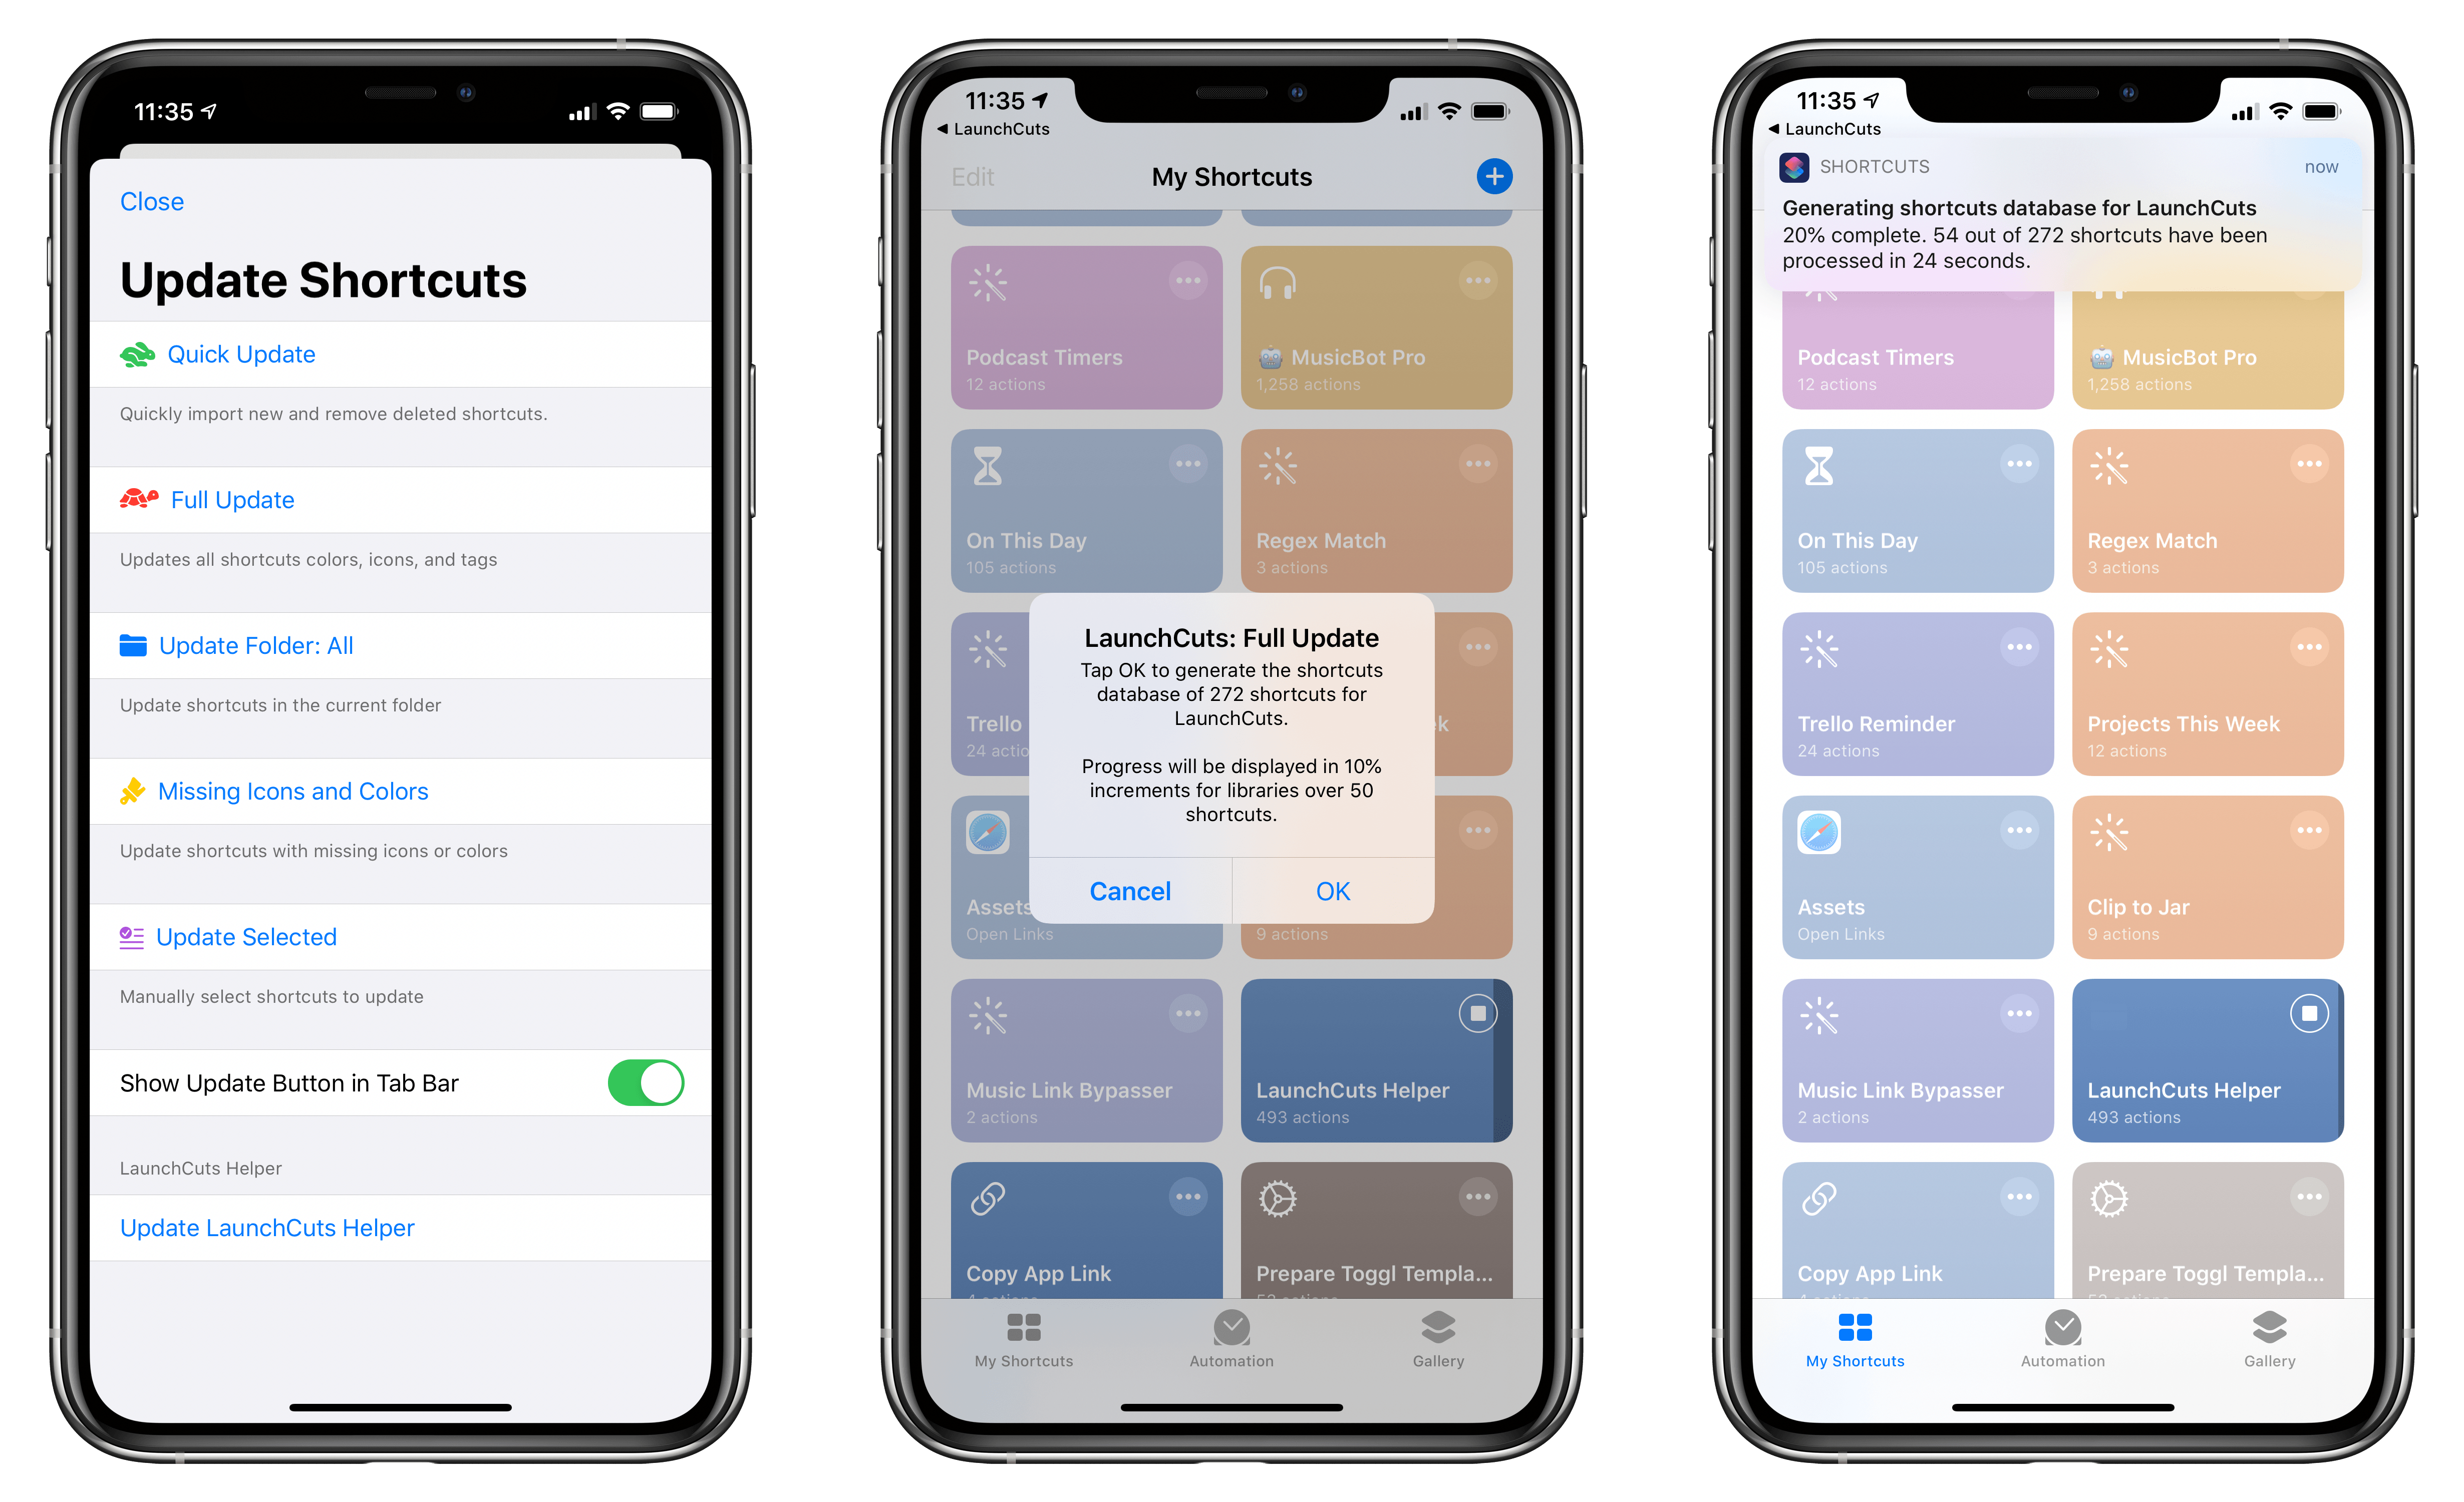 Running the LaunchCuts Helper shortcut to update the app's database of your installed shortcuts.